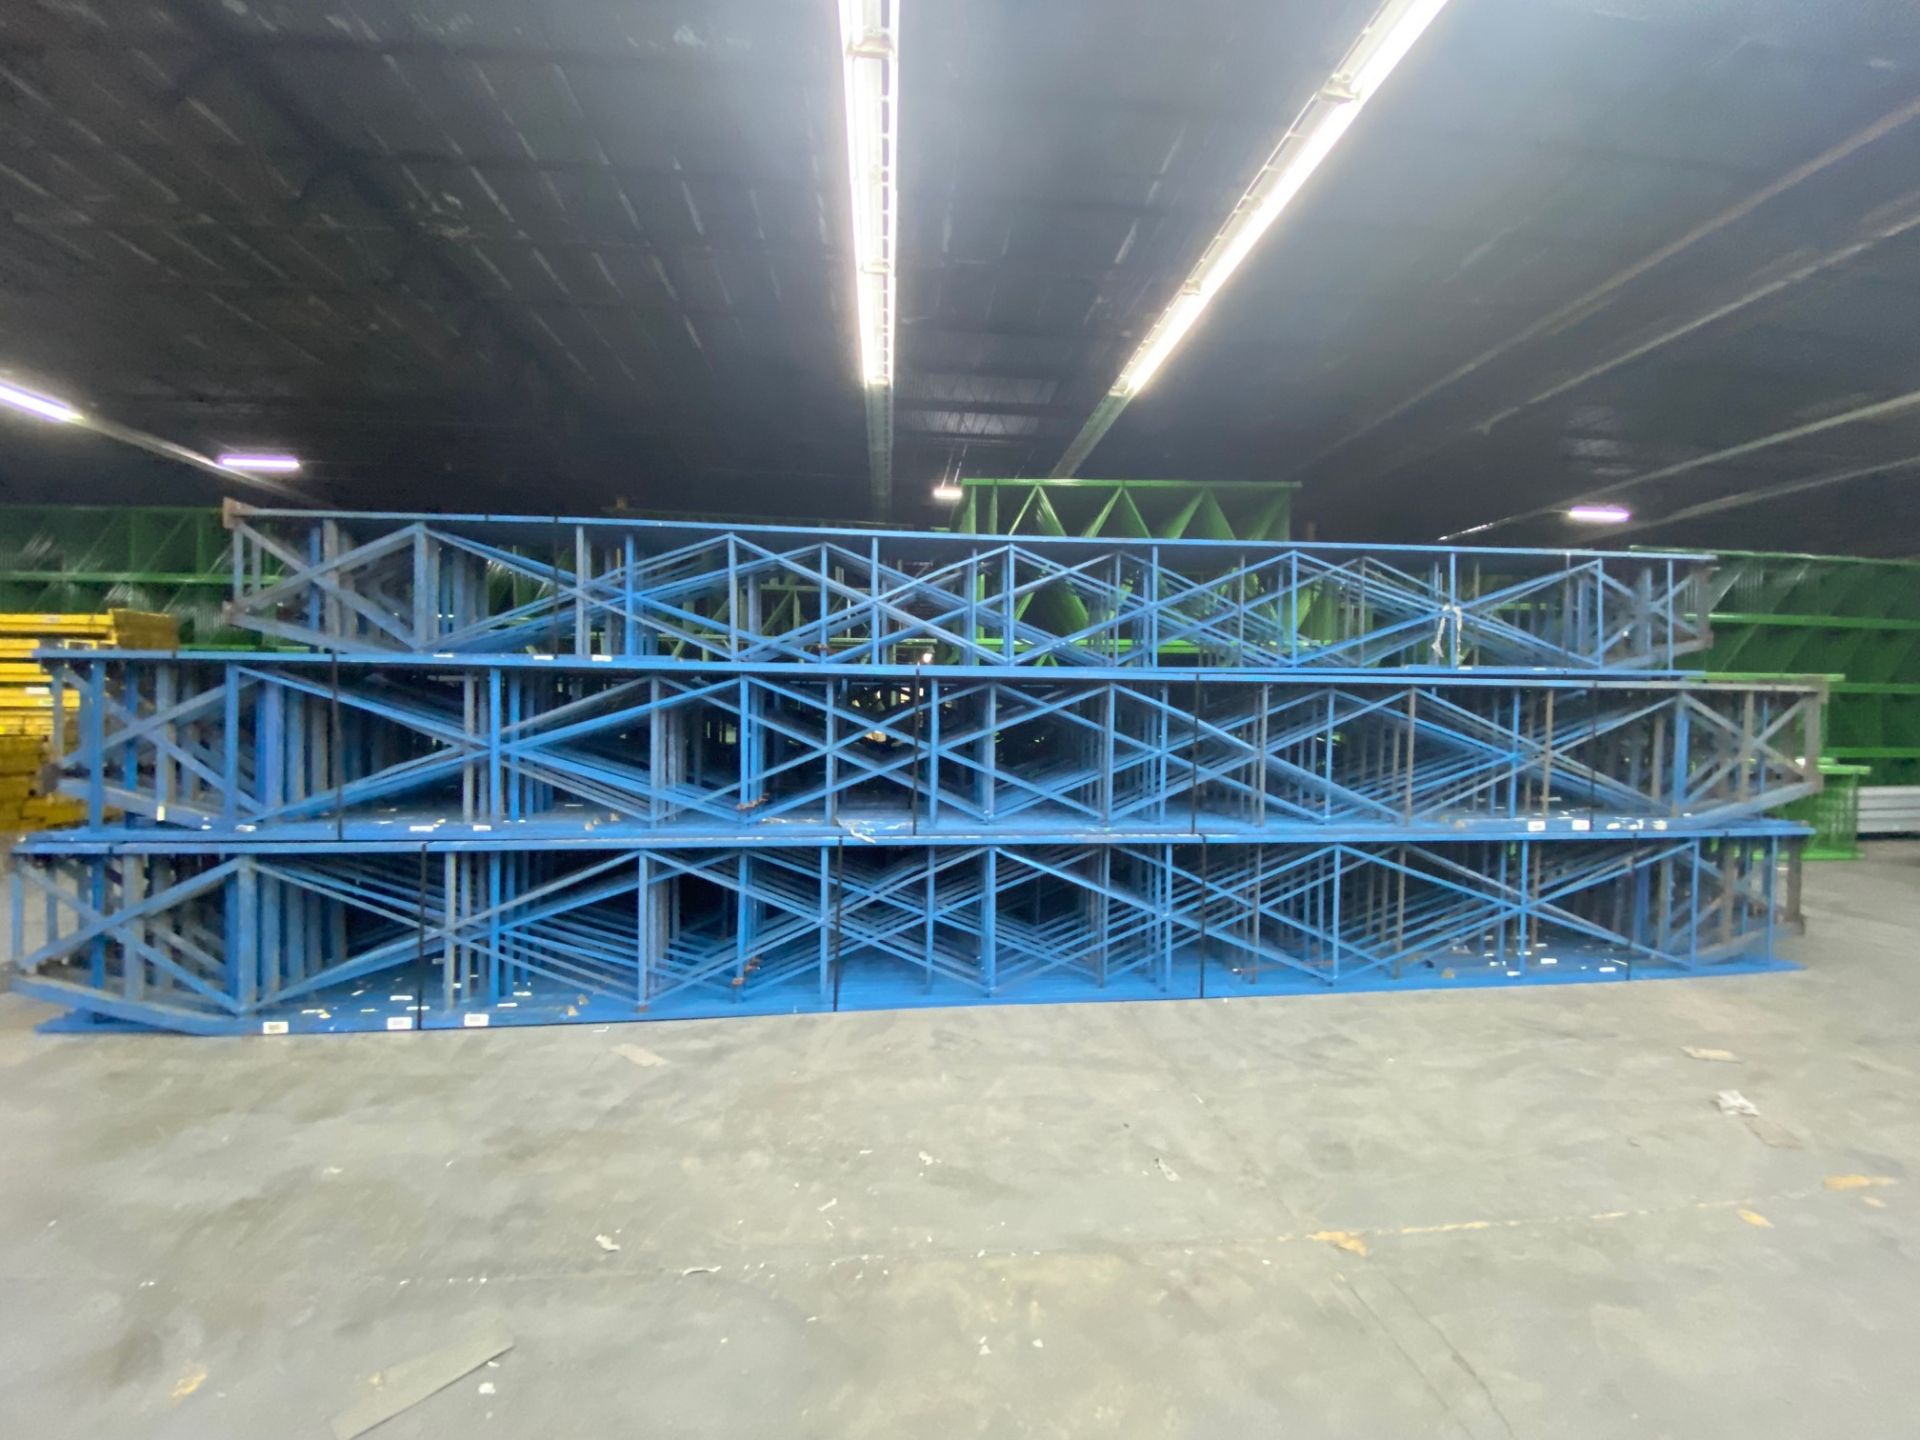 USED 30 PCS OF STRUCTURAL UPRIGHT. SIZE 30'H TO 33'H X 36"D, BLUE - Image 2 of 3